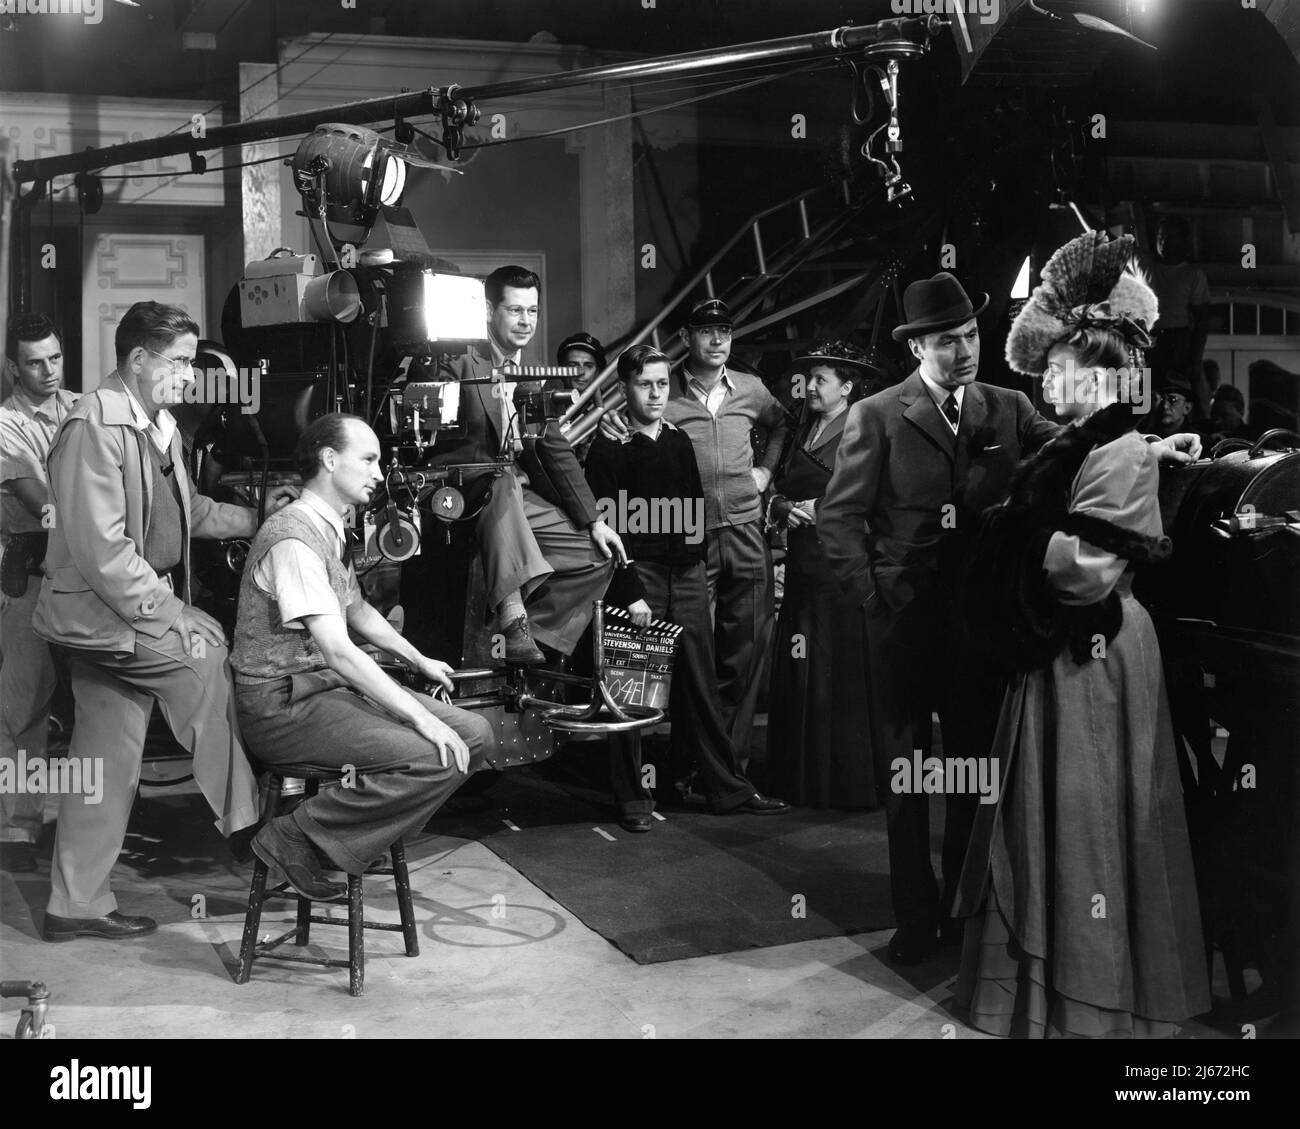 Director ROBERT STEVENSON and Movie Crew on set candid filming CHARLES BOYER and MARGARET SULLAVAN in BACK STREET 1941 director ROBERT STEVENSON novel Fannie Hurst screenplay Bruce Manning and Felix Jackson cinematography William H. Daniels music Frank Skinner costume design Vera West Universal Pictures Stock Photo